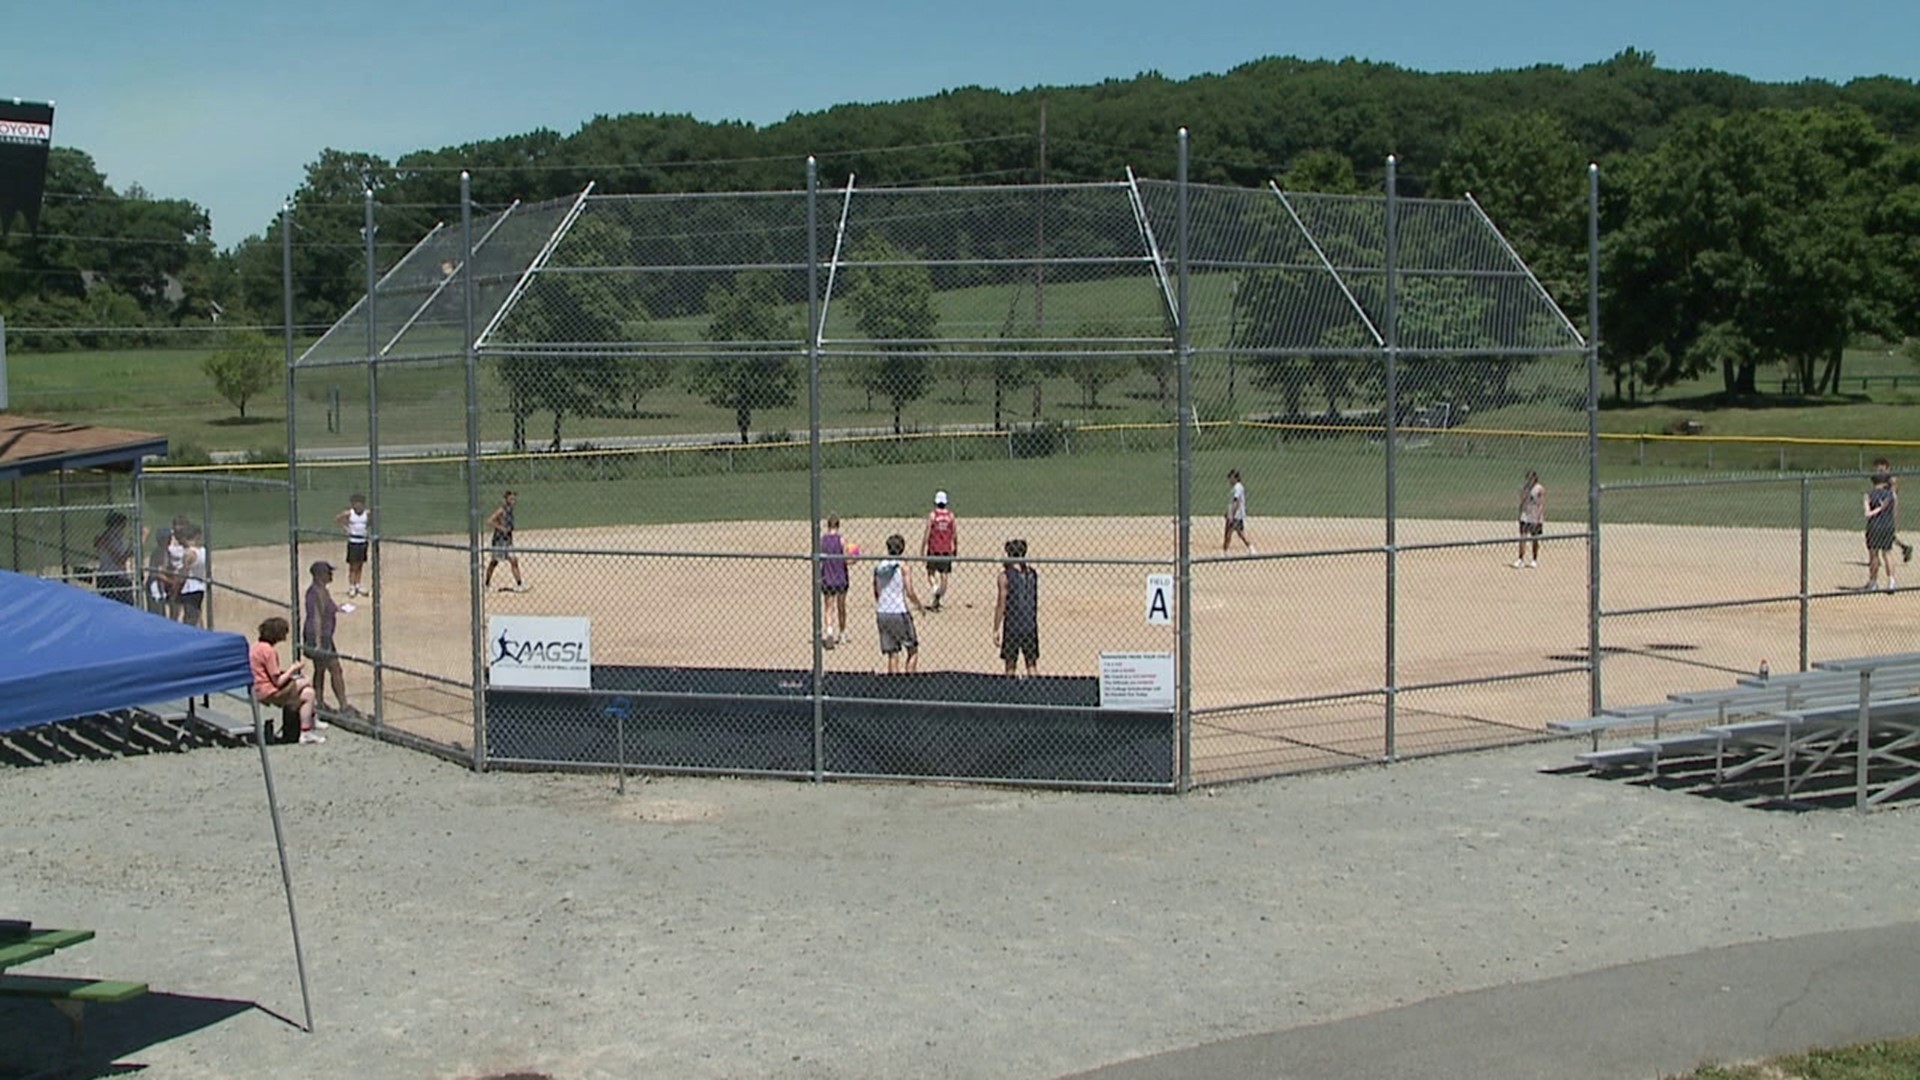 The tournament was held a Hillside Park in Clarks Summit Saturday afternoon.